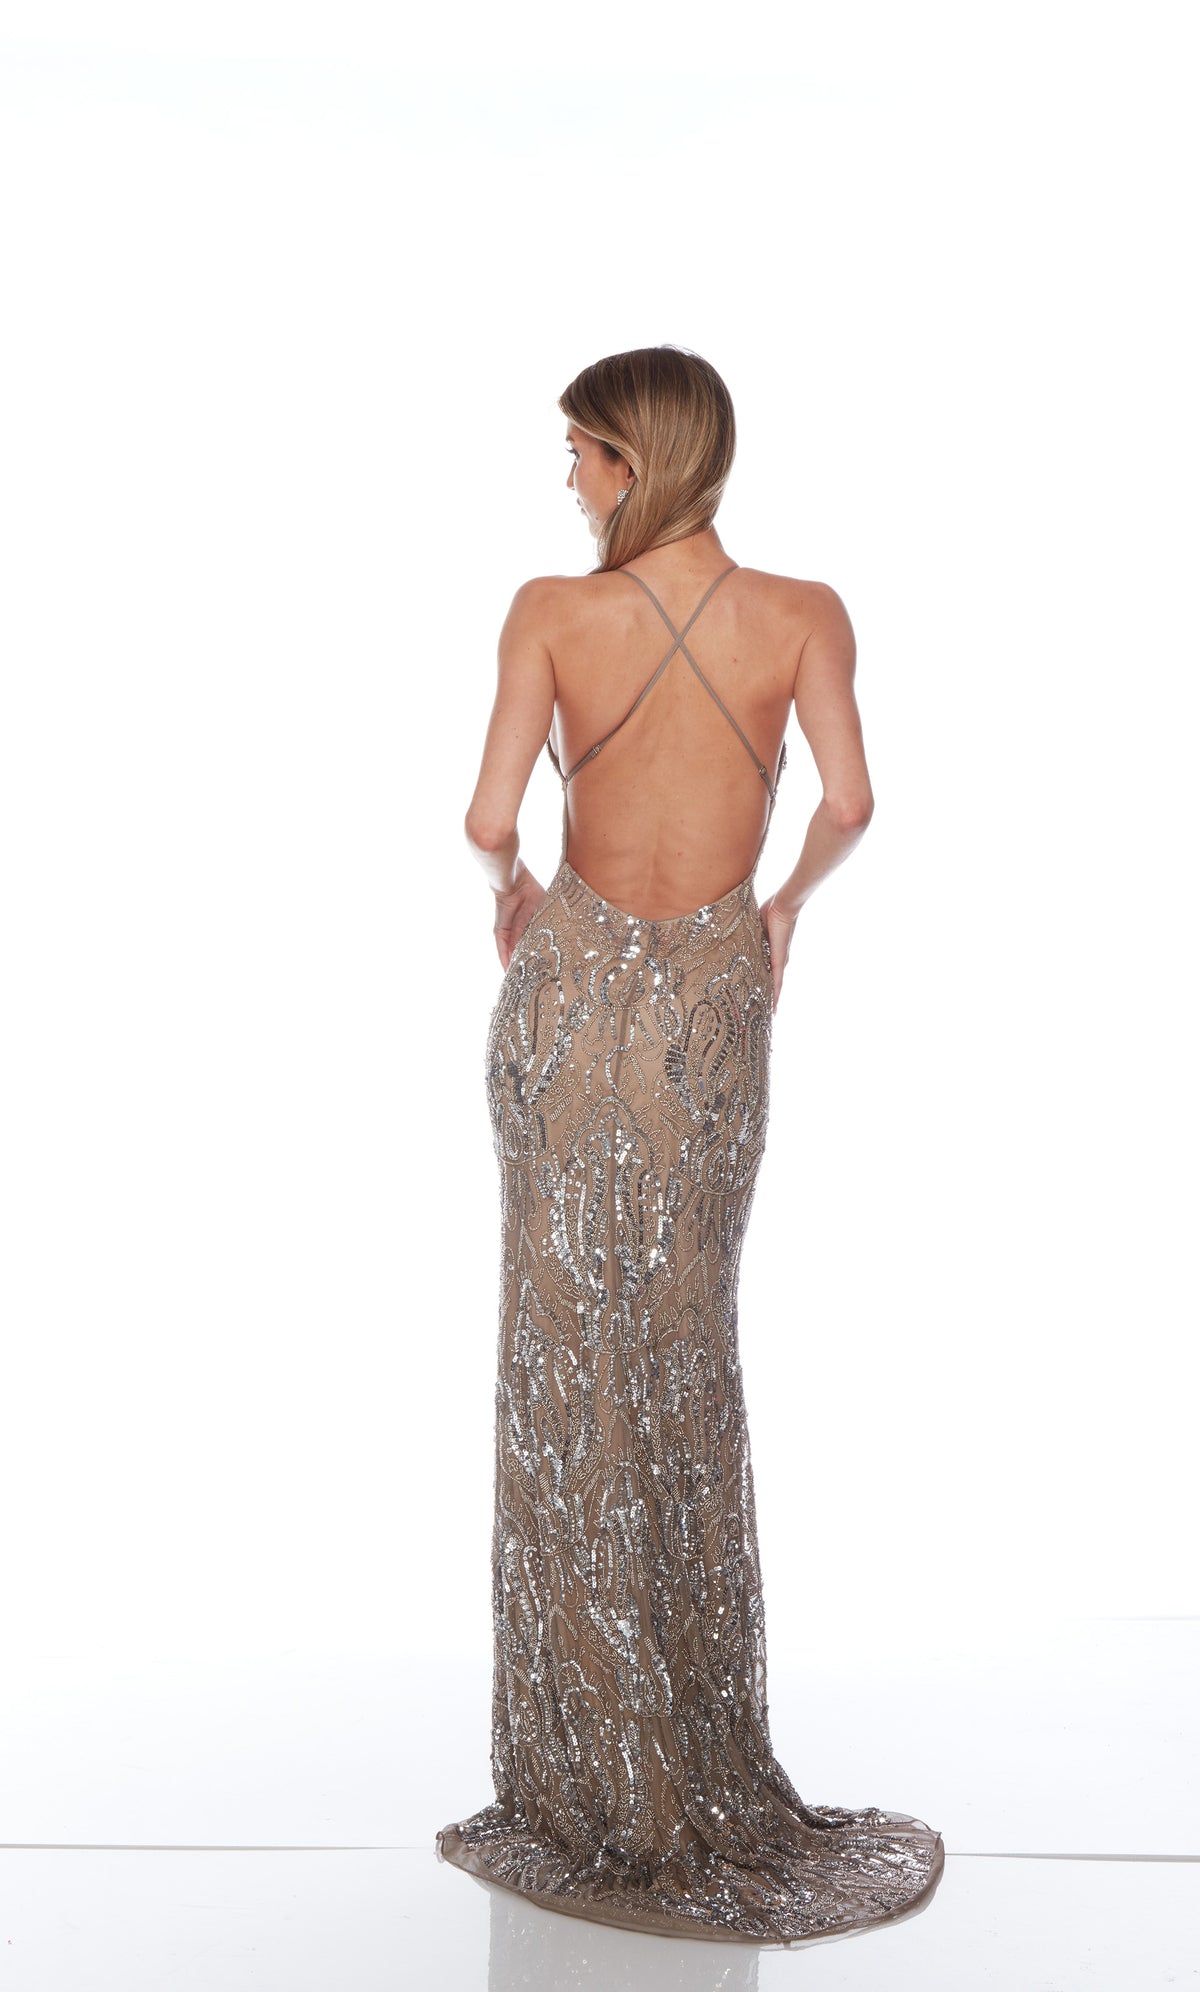 Elegant tan formal gown: Hand-beaded, V neckline, spaghetti straps, strappy back, and intricate paisley-patterned design for an chic and sophisticated look.